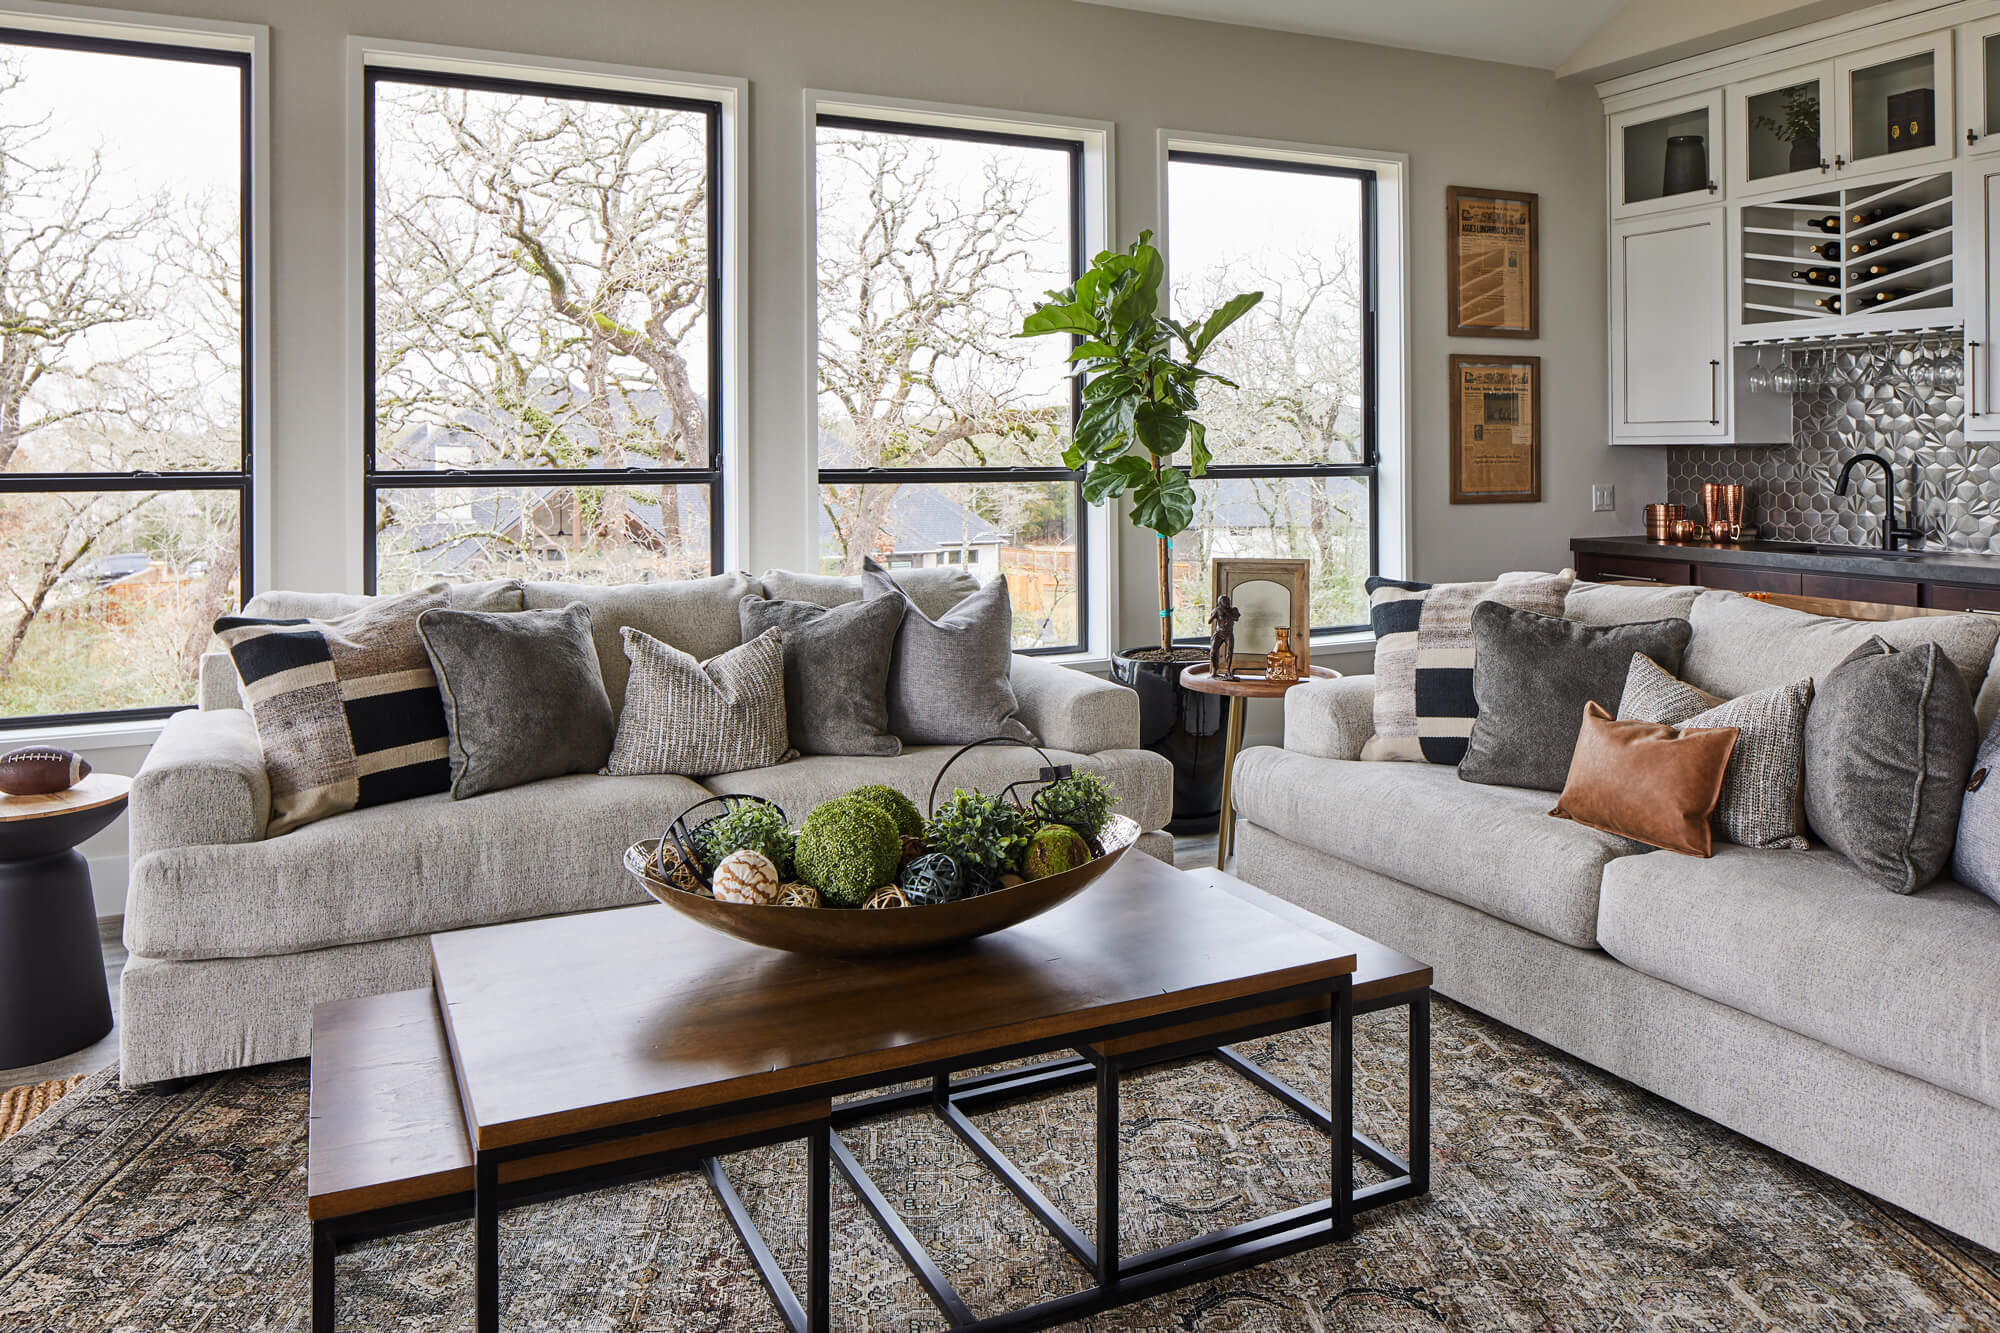 Kurk Homes Southern Living Showcase Home Brazos Bend Home game day room